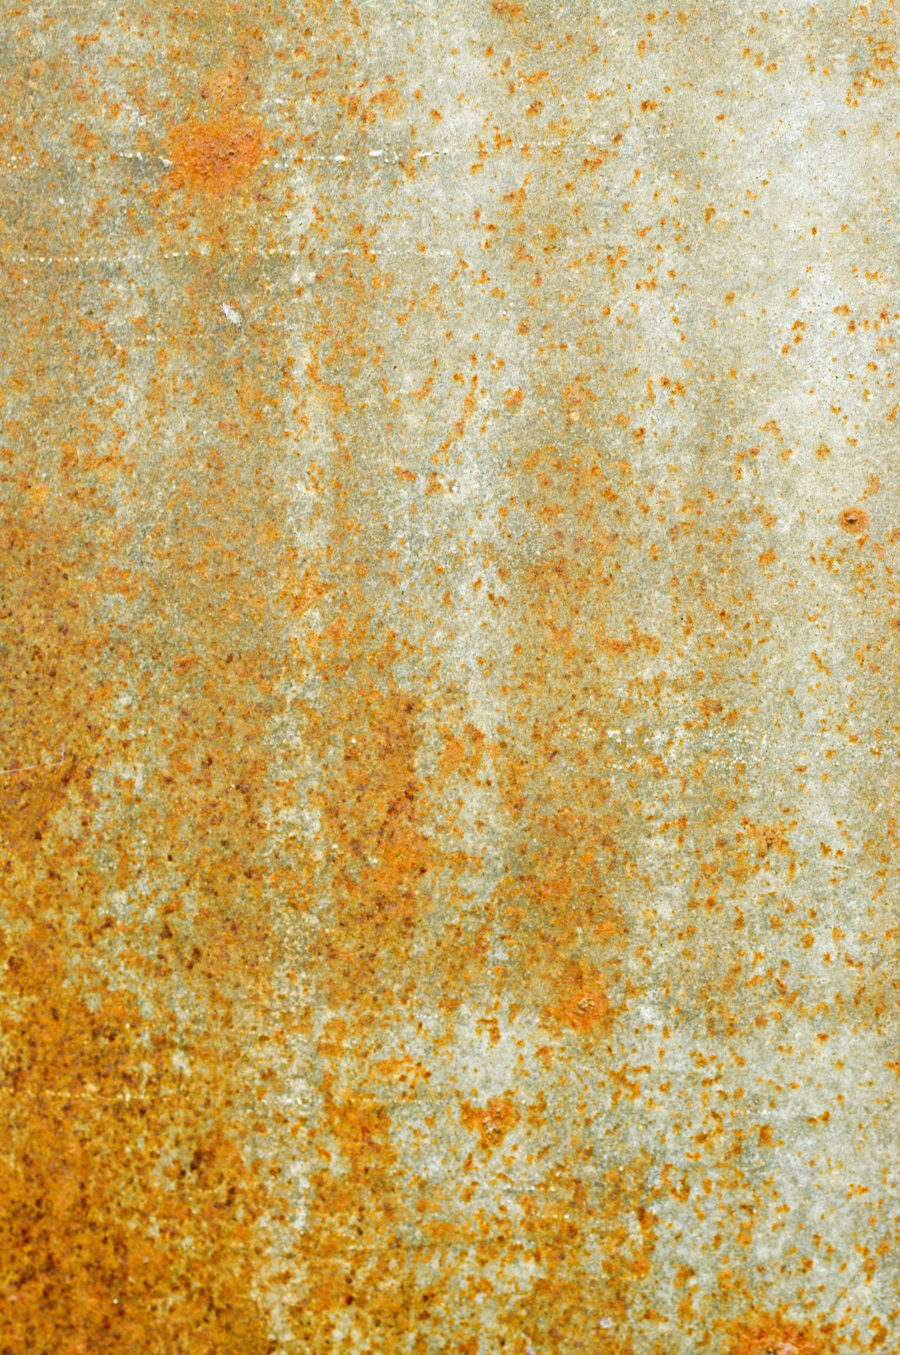 old rusted metal background texture